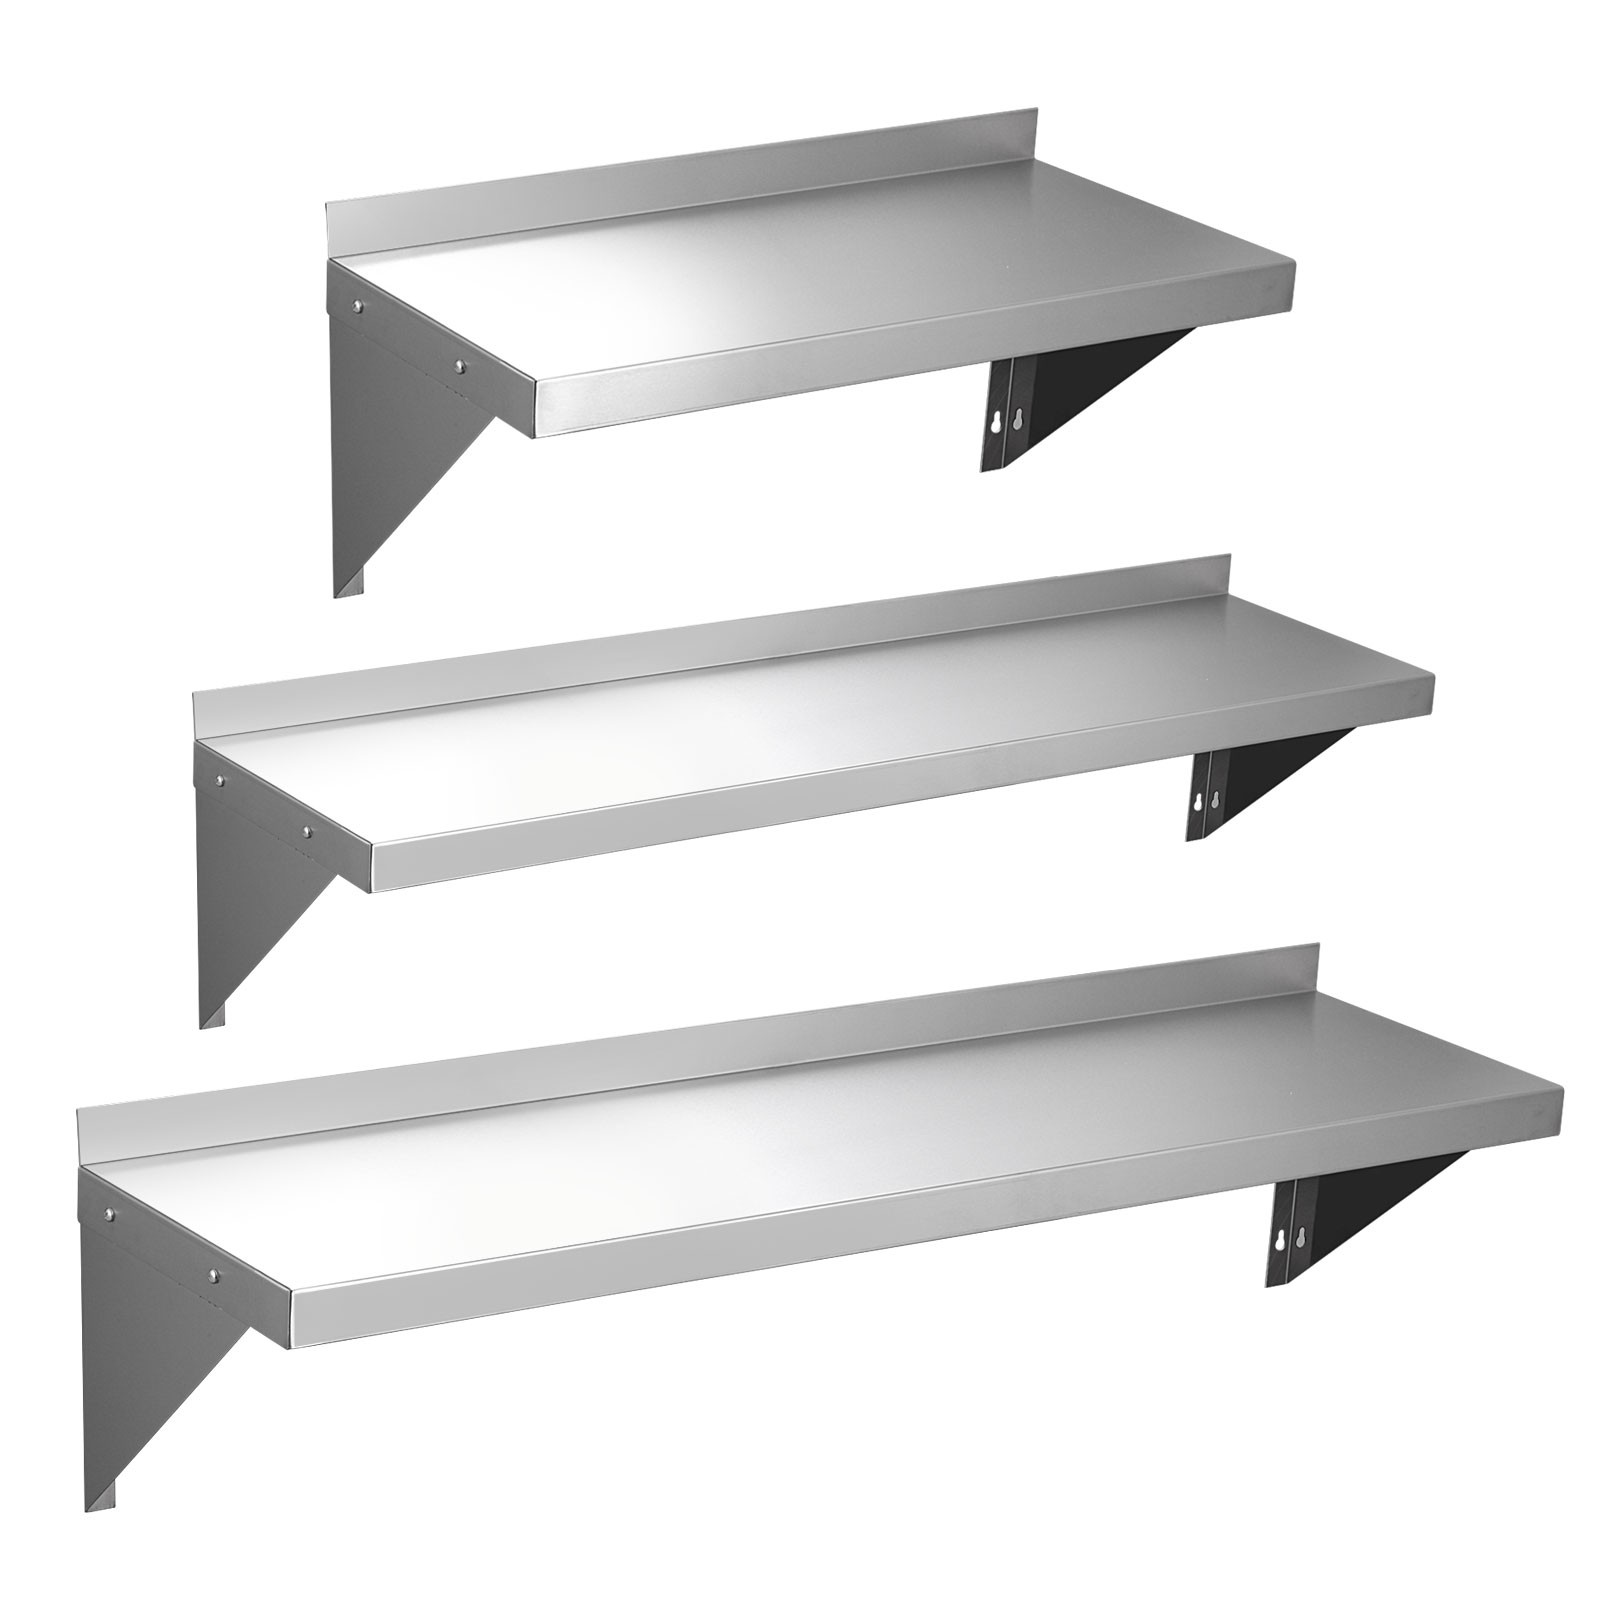 600 900 1200mm stainless steel wall shelf with brackets